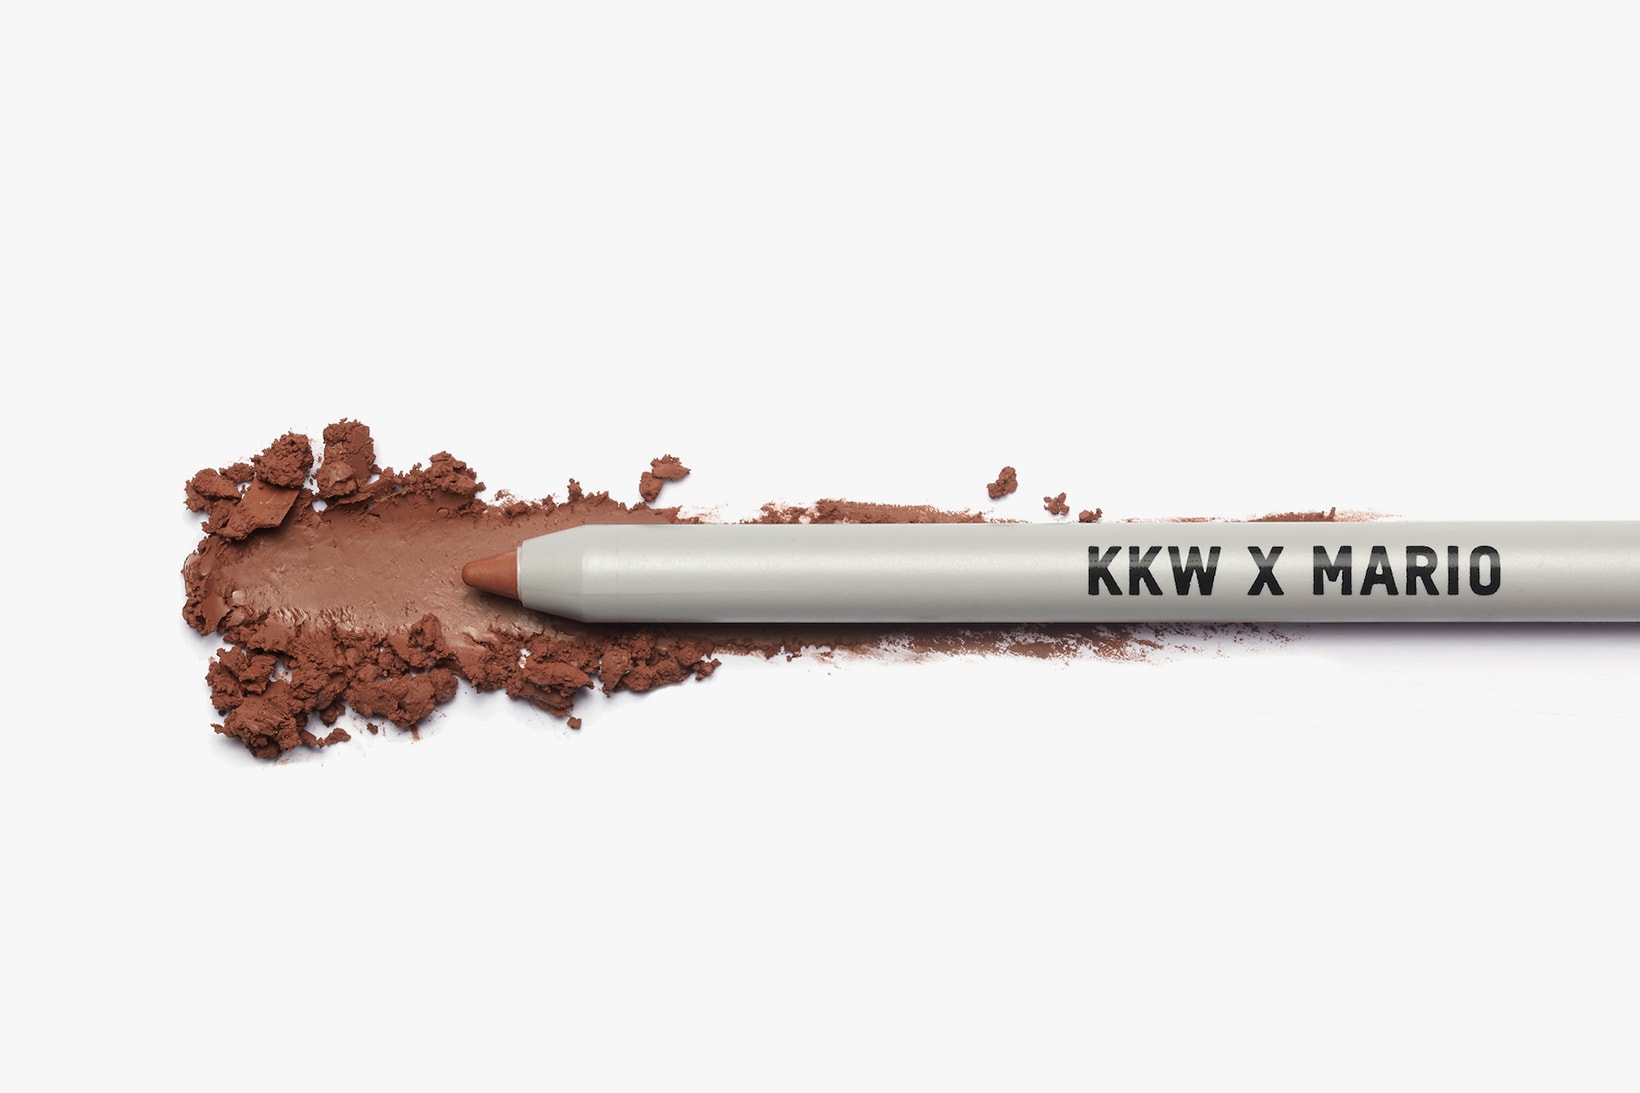 kim kardashian makeup by mario kkw beauty second collection eyeliner brown